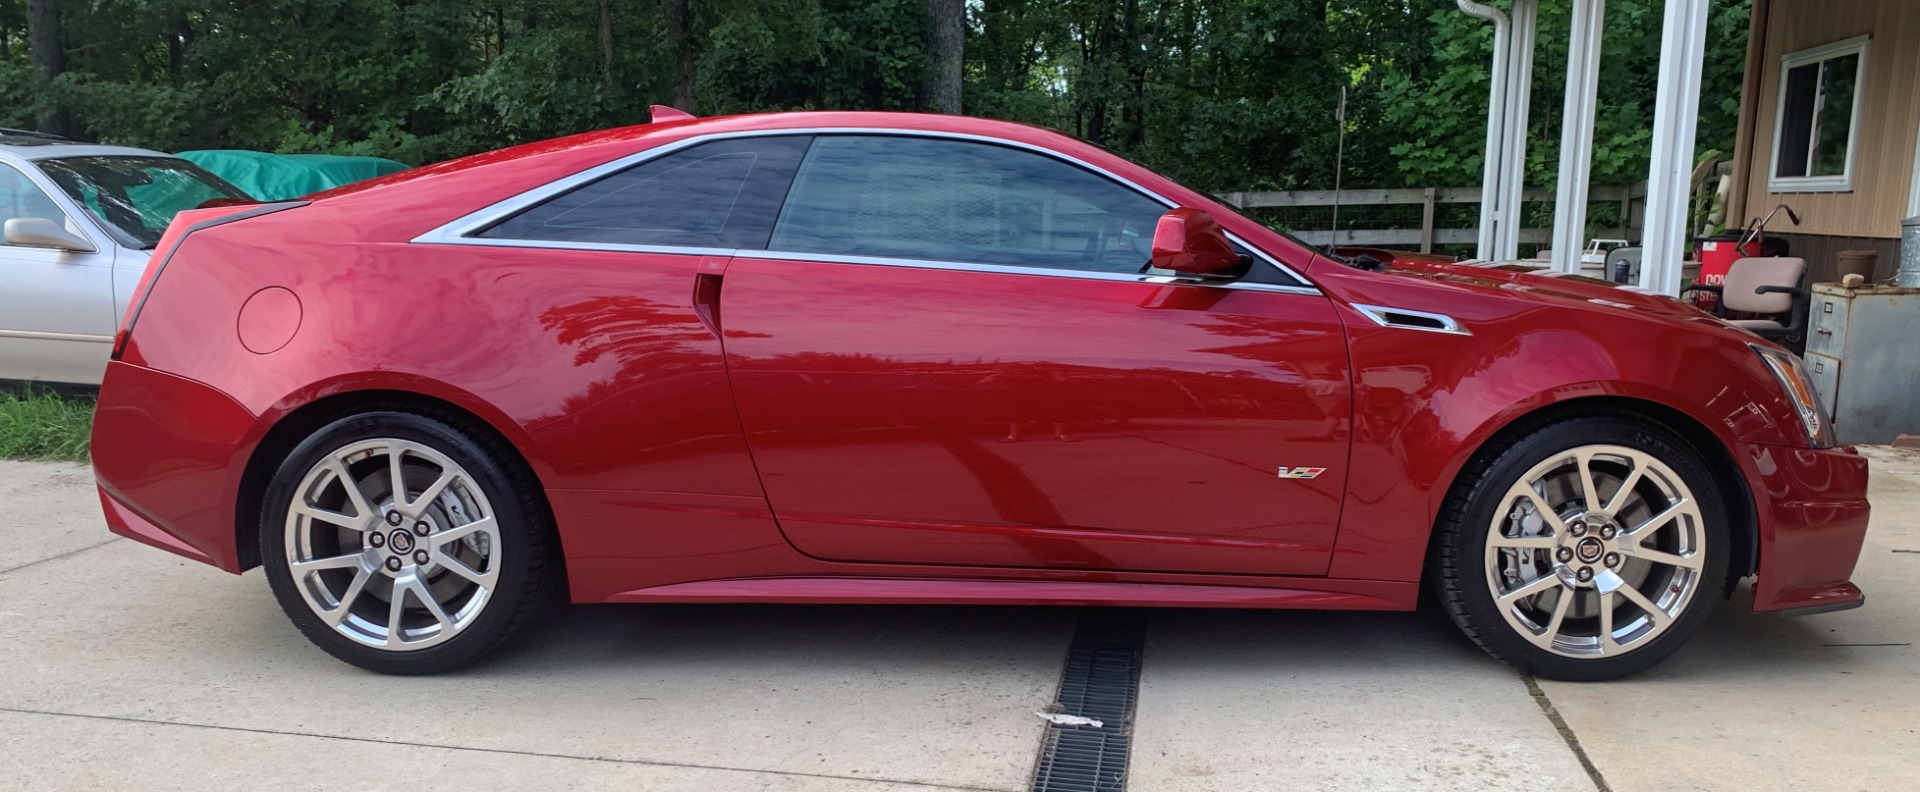 Used 2011 Cadillac CTS-V  215 , For Sale $43500, Call Us: (704) 996-3735